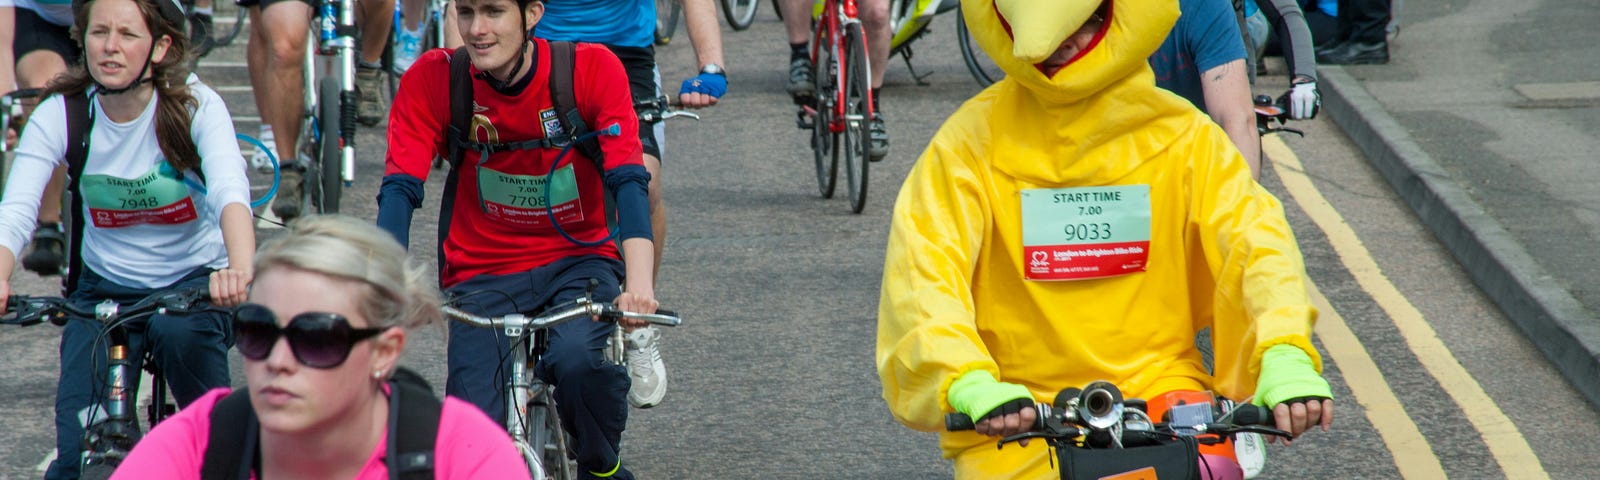 Person riding a pushbike in a crowd dressed in a chicken suit.